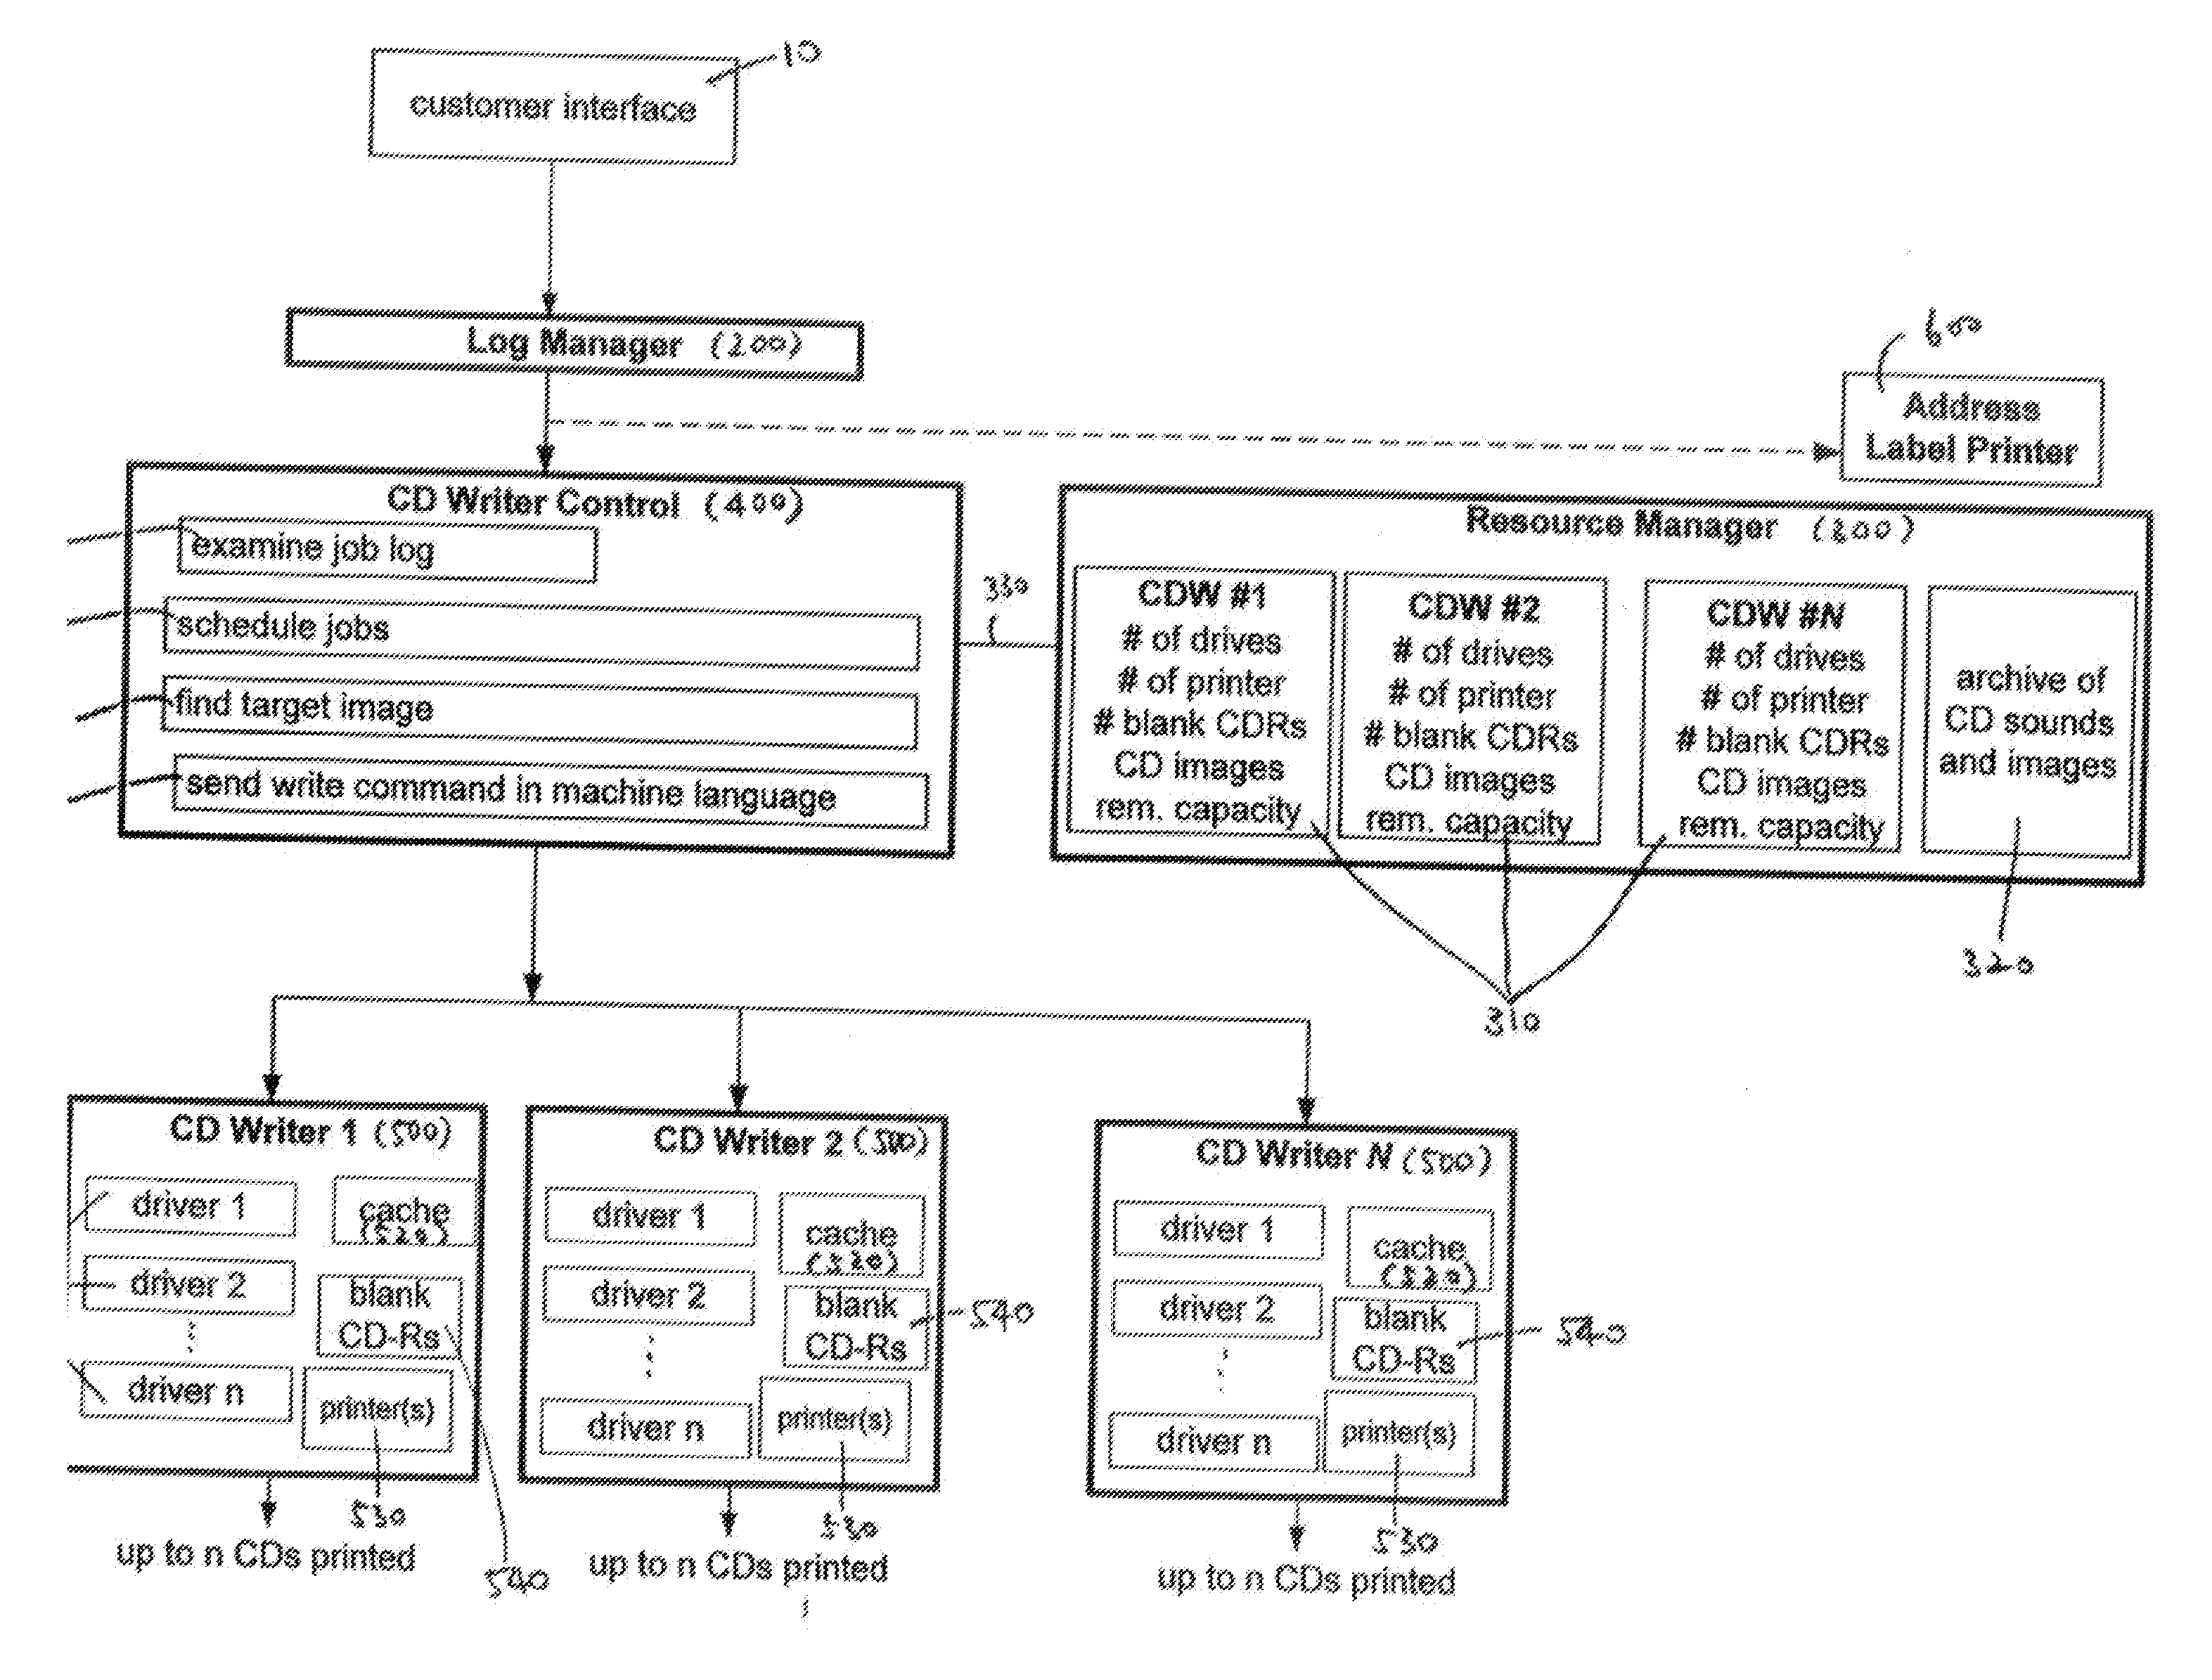 Method and system for supplying products from pre-stored digital data in response to demands transmitted via computer network